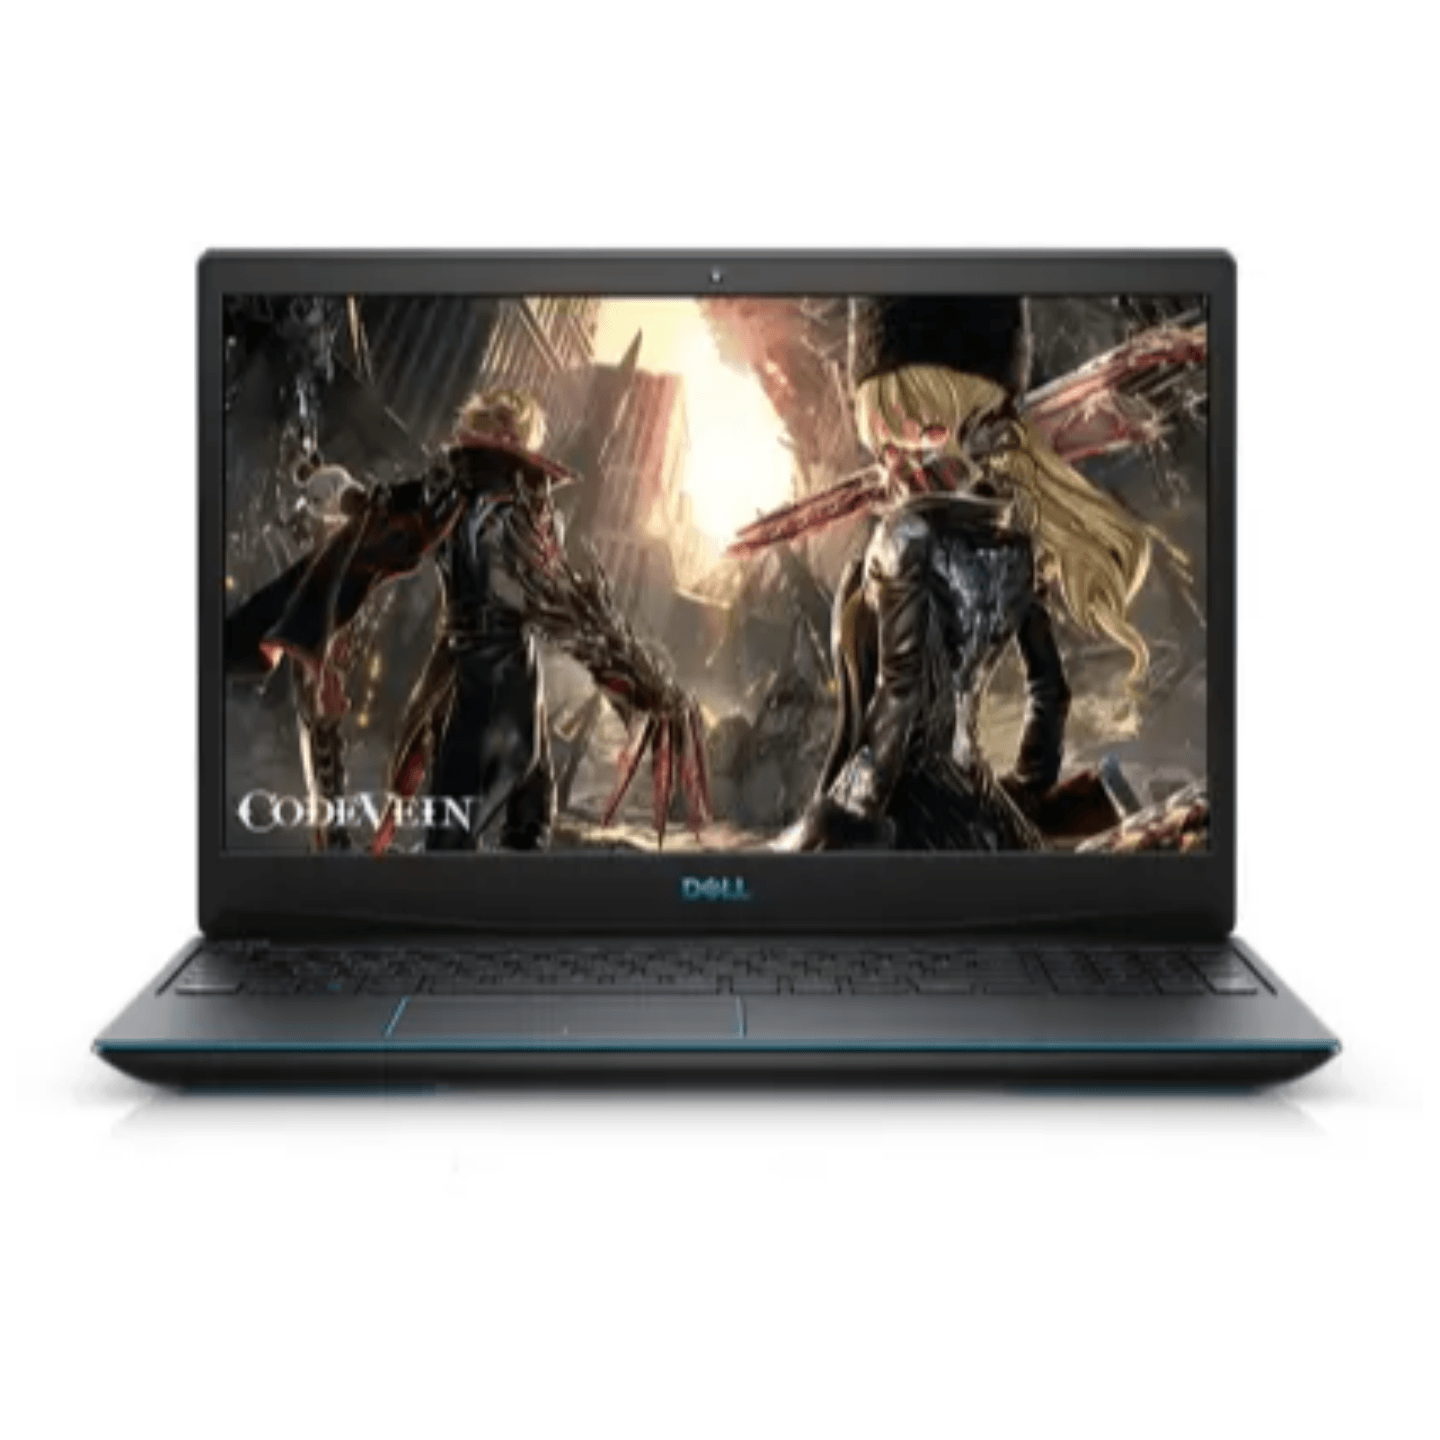 DELL G3 Core i5 9th Gen - (8 GB/512 GB SSD/Windows 10 Home/4 GB Graphics/NVIDIA GeForce GTX 1650) G3 3590/G3 15 3590 Gaming Laptop  (15.6 inch, Eclipse Black, 2.34 kg, With MS Office)